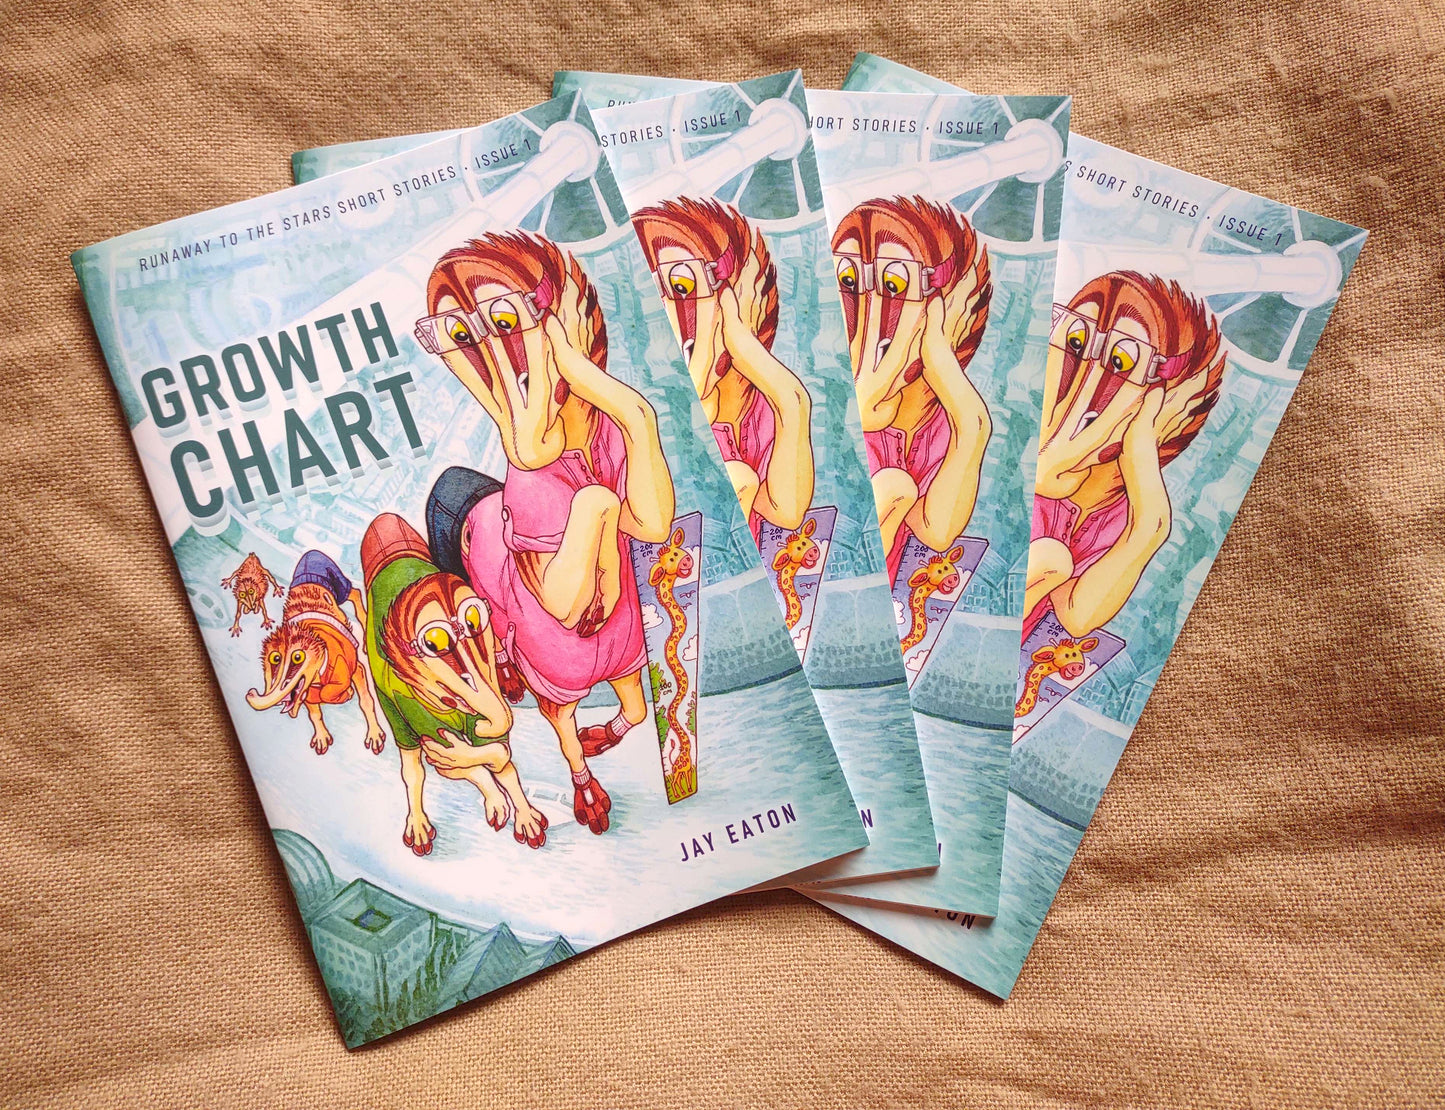 RttS Short Stories: Growth Chart (Softcover)